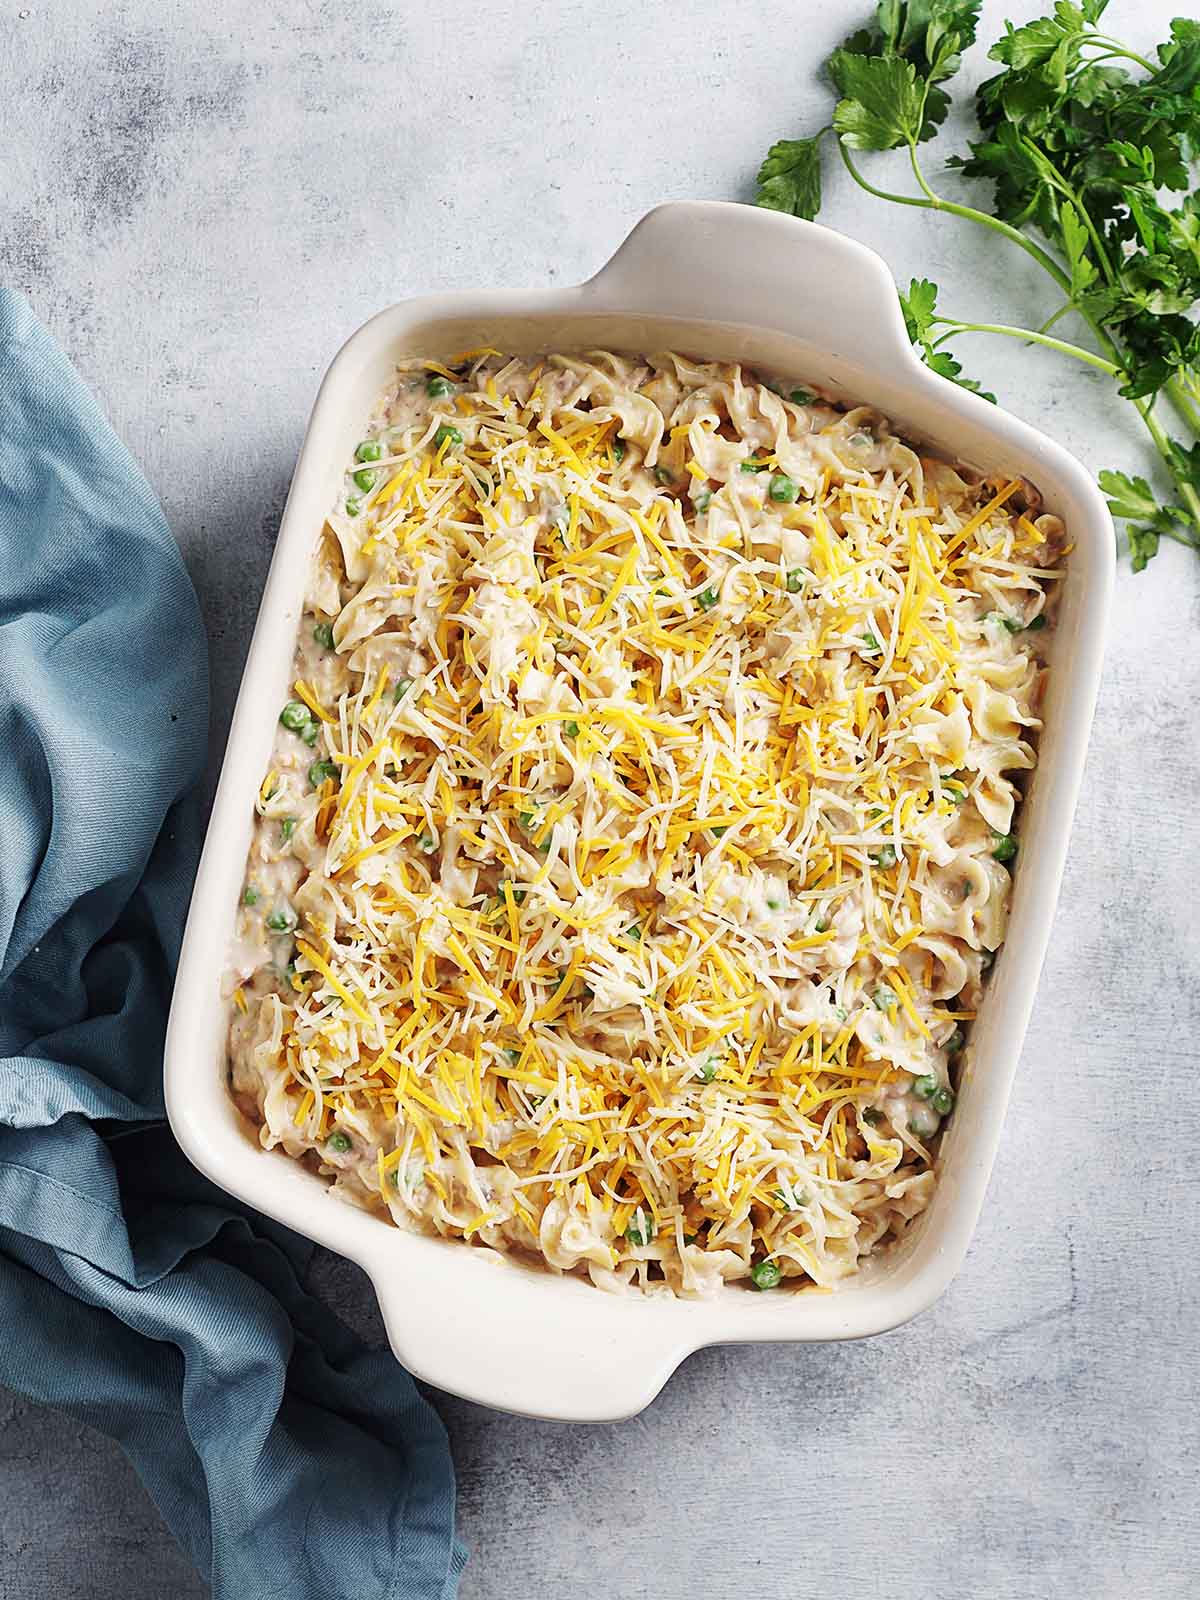 A classic tuna noodle casserole in a rectangular glass baking dish with melted cheese and peas and shredded cheese on top.